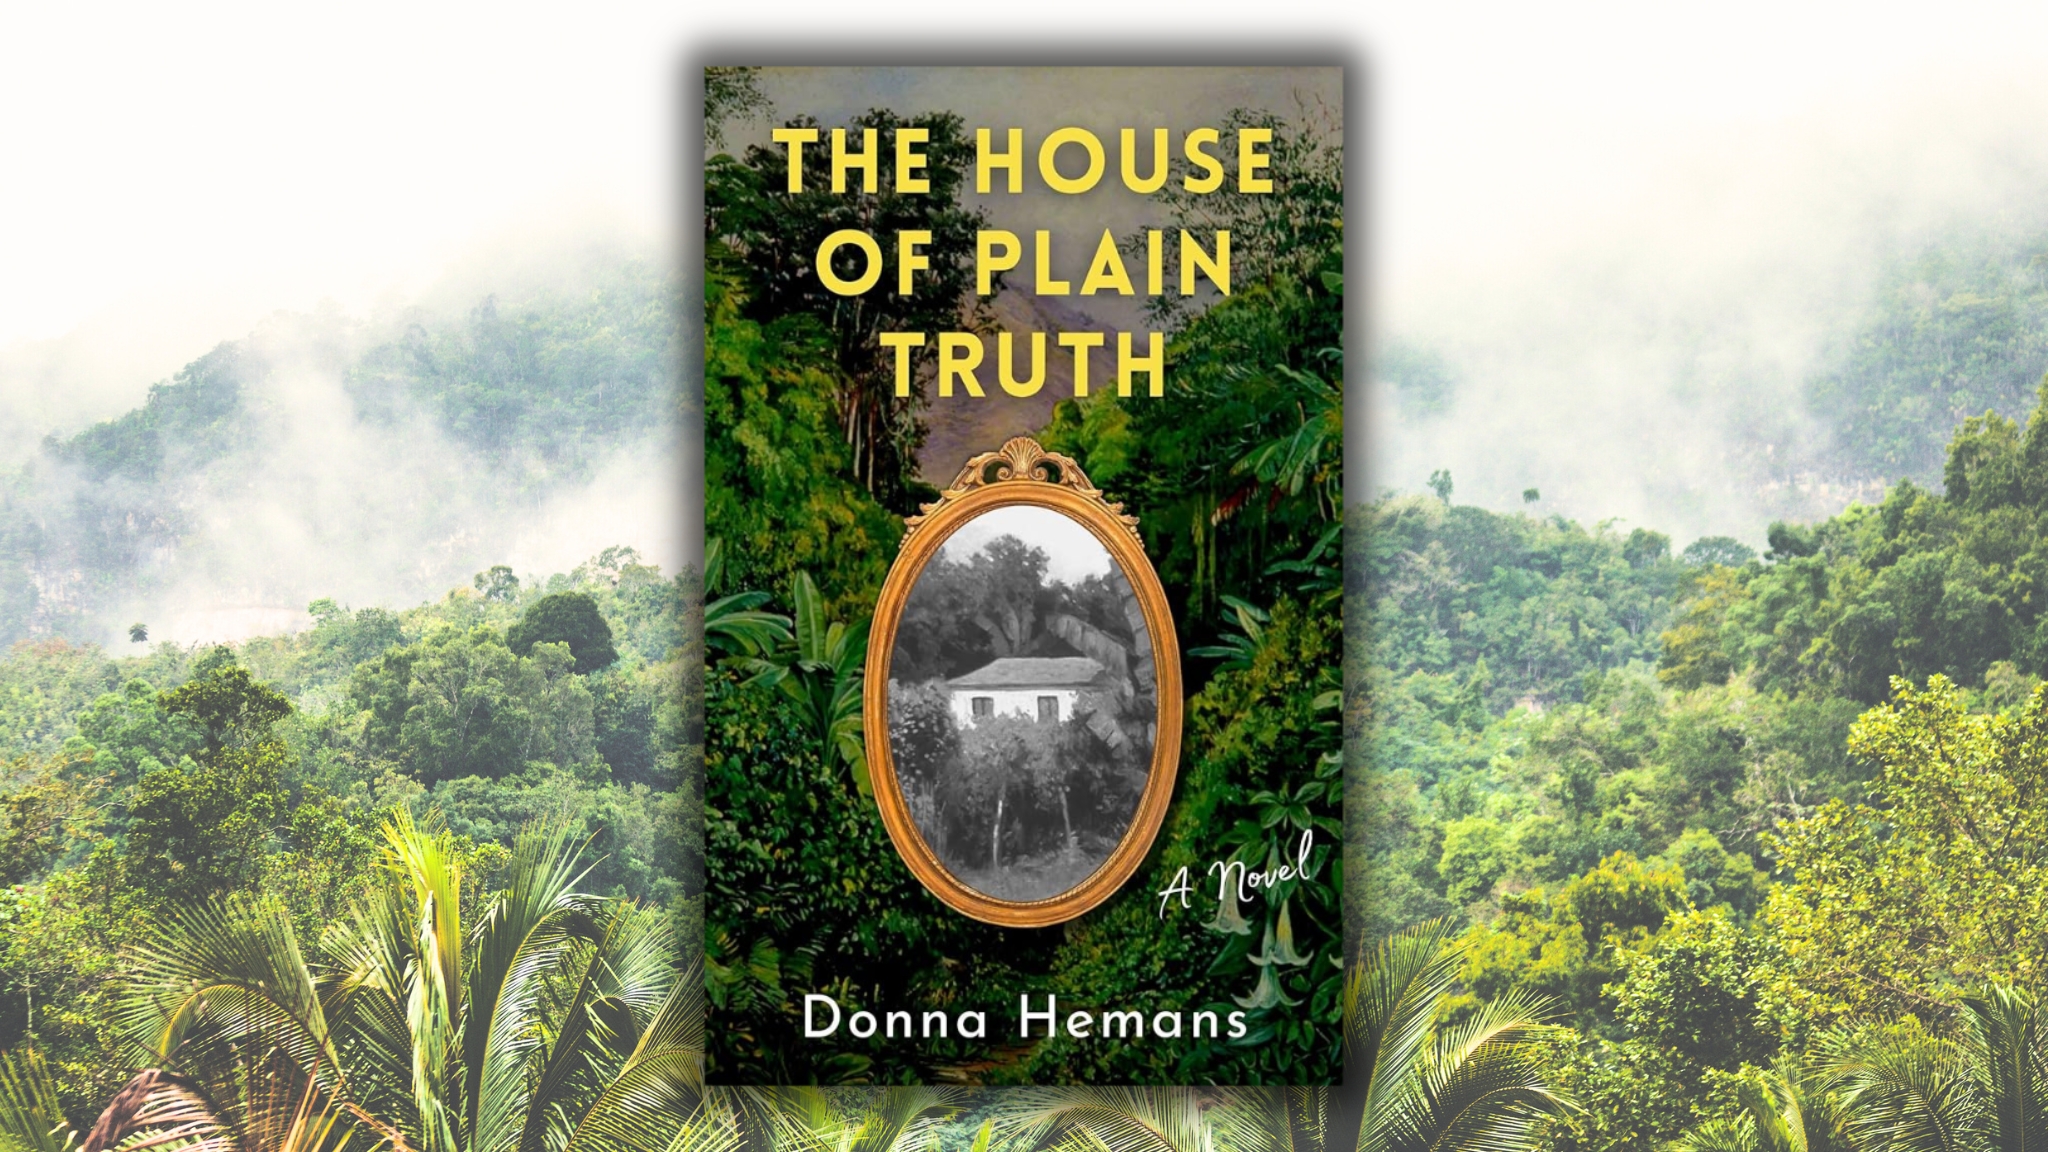 The House of Plain Truth by Donna Hemans